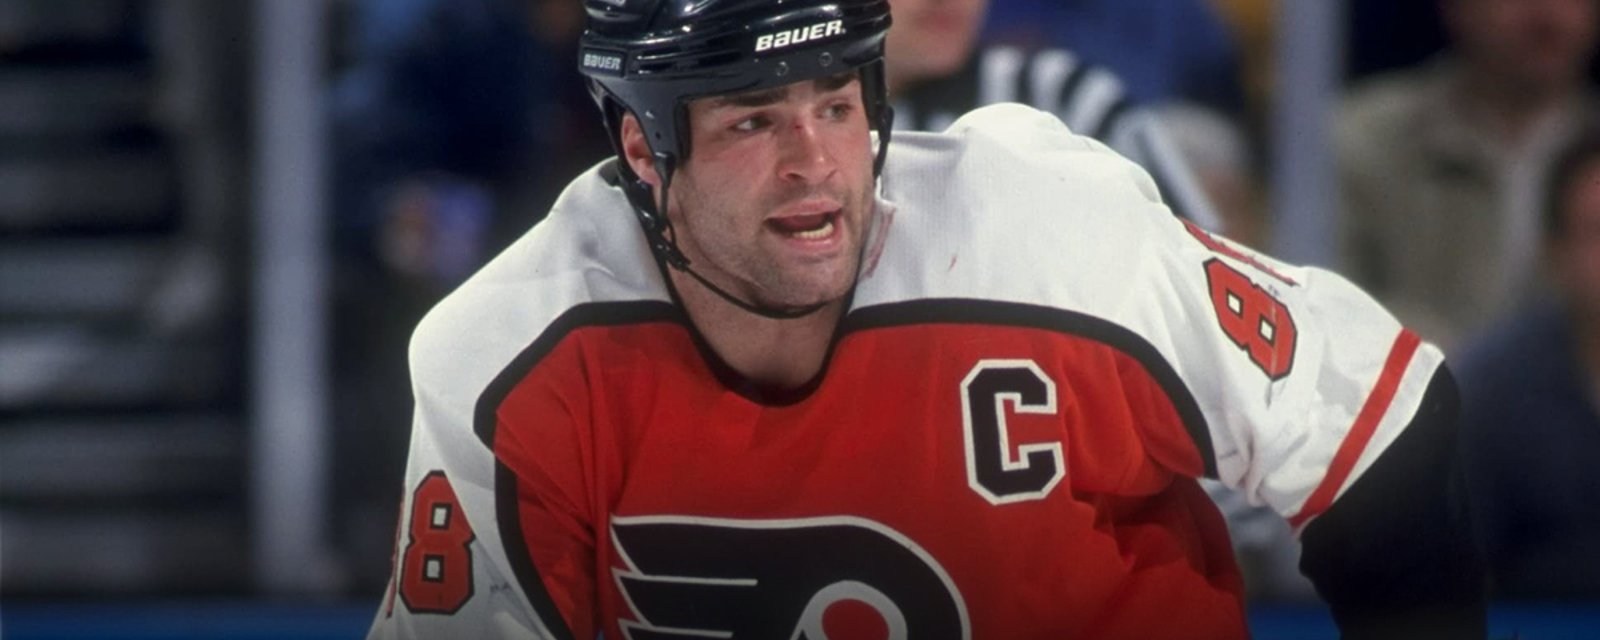 Breaking: Flyers will retire Lindros’ 88